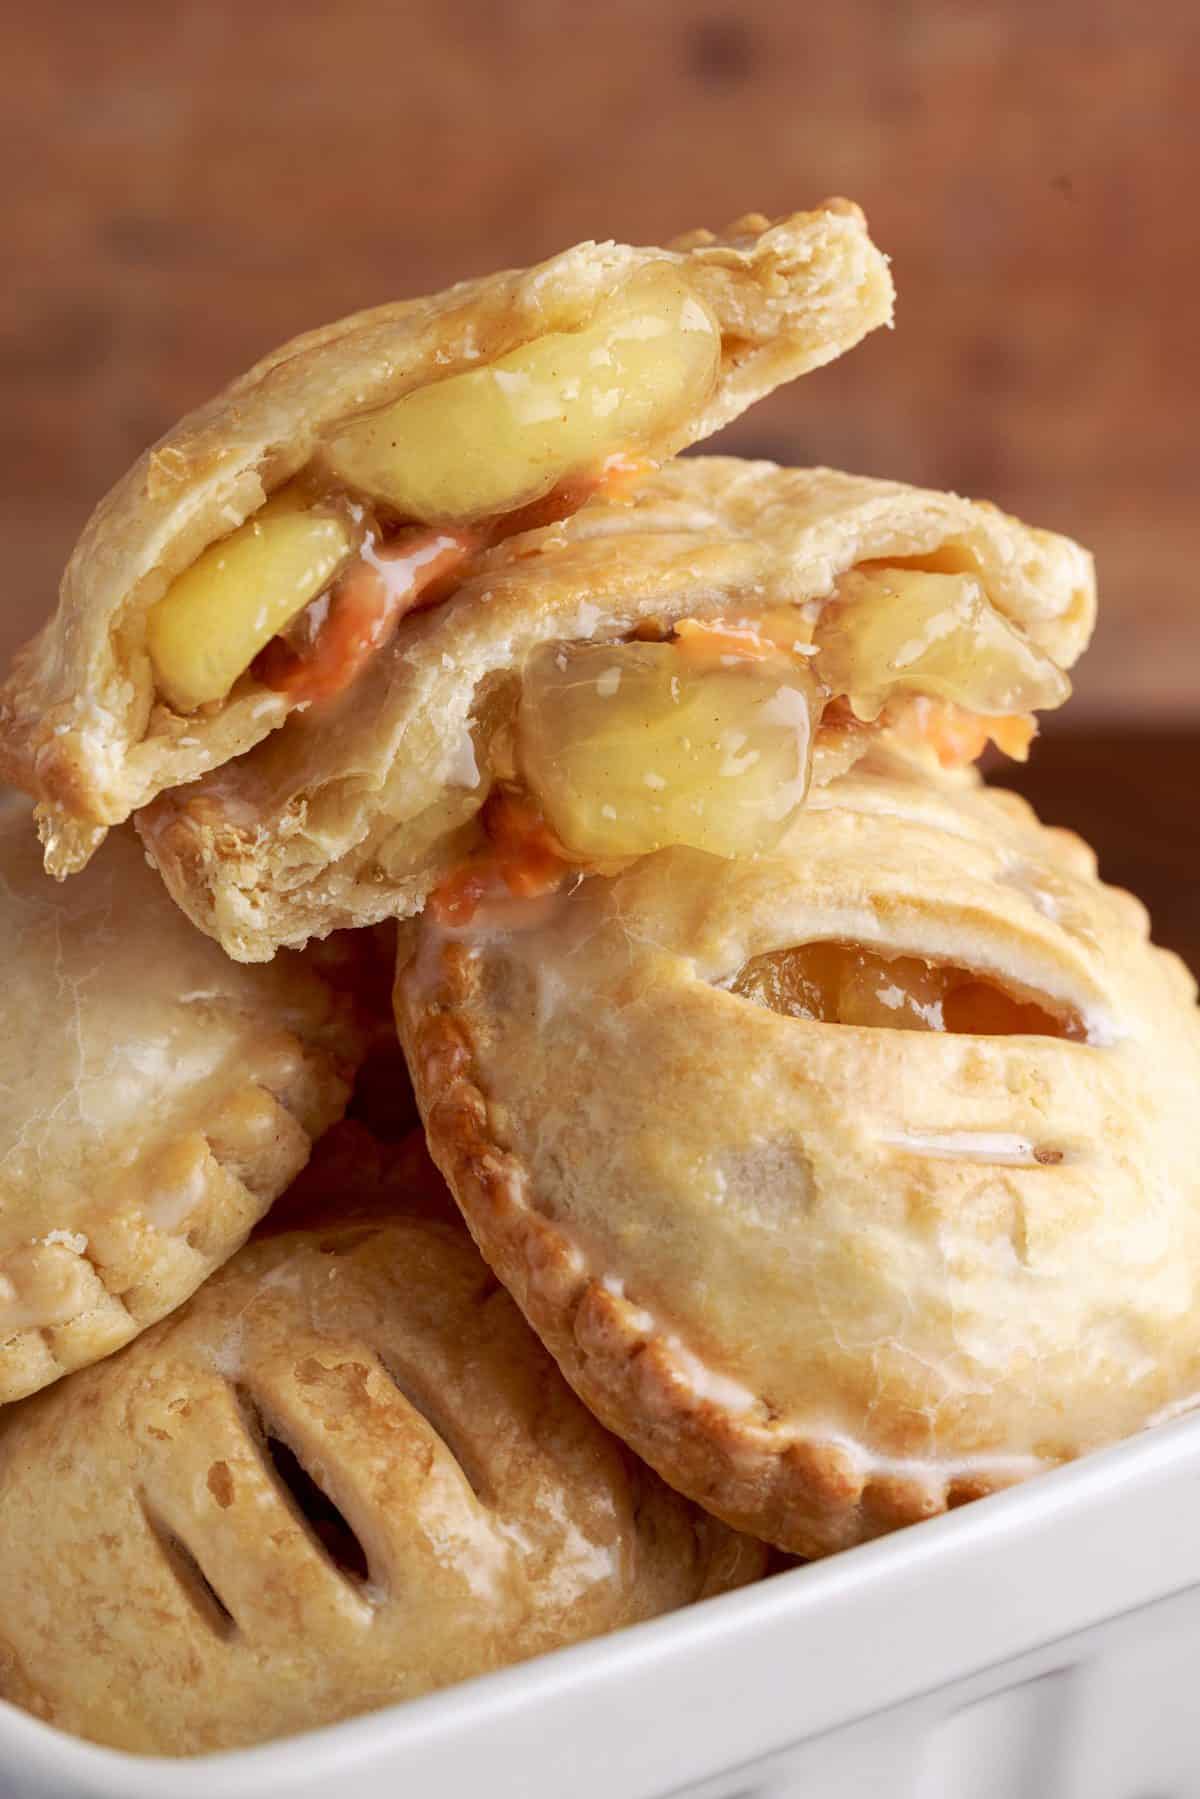 stacked caramel apple hand pies with top pie cut in half exposing the apple filling